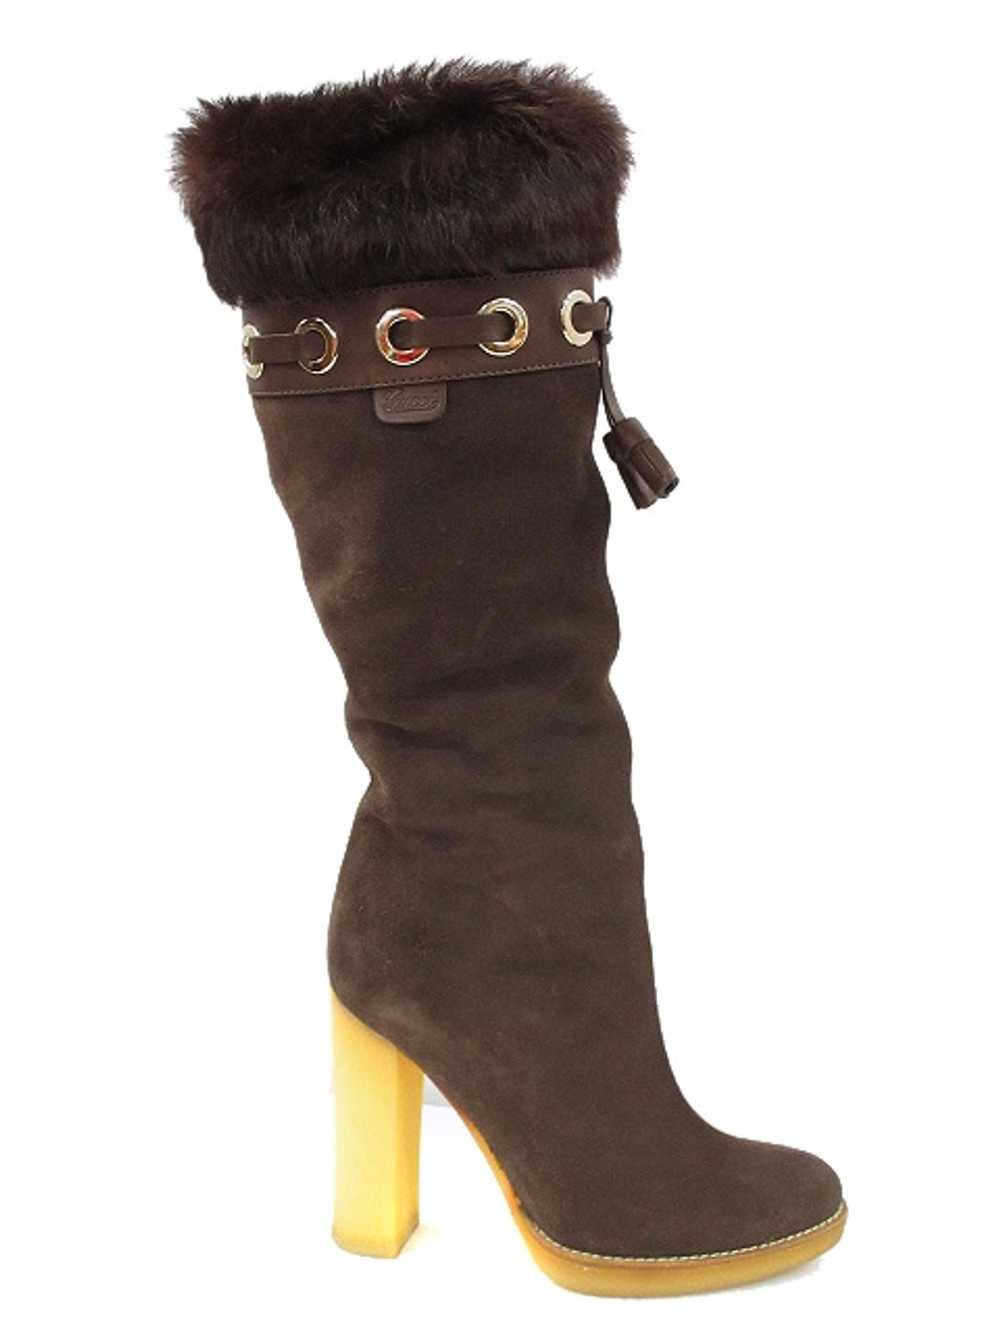 Gucci Long Boots W/ Fur Brown Suede Rubber Sole S… - image 3